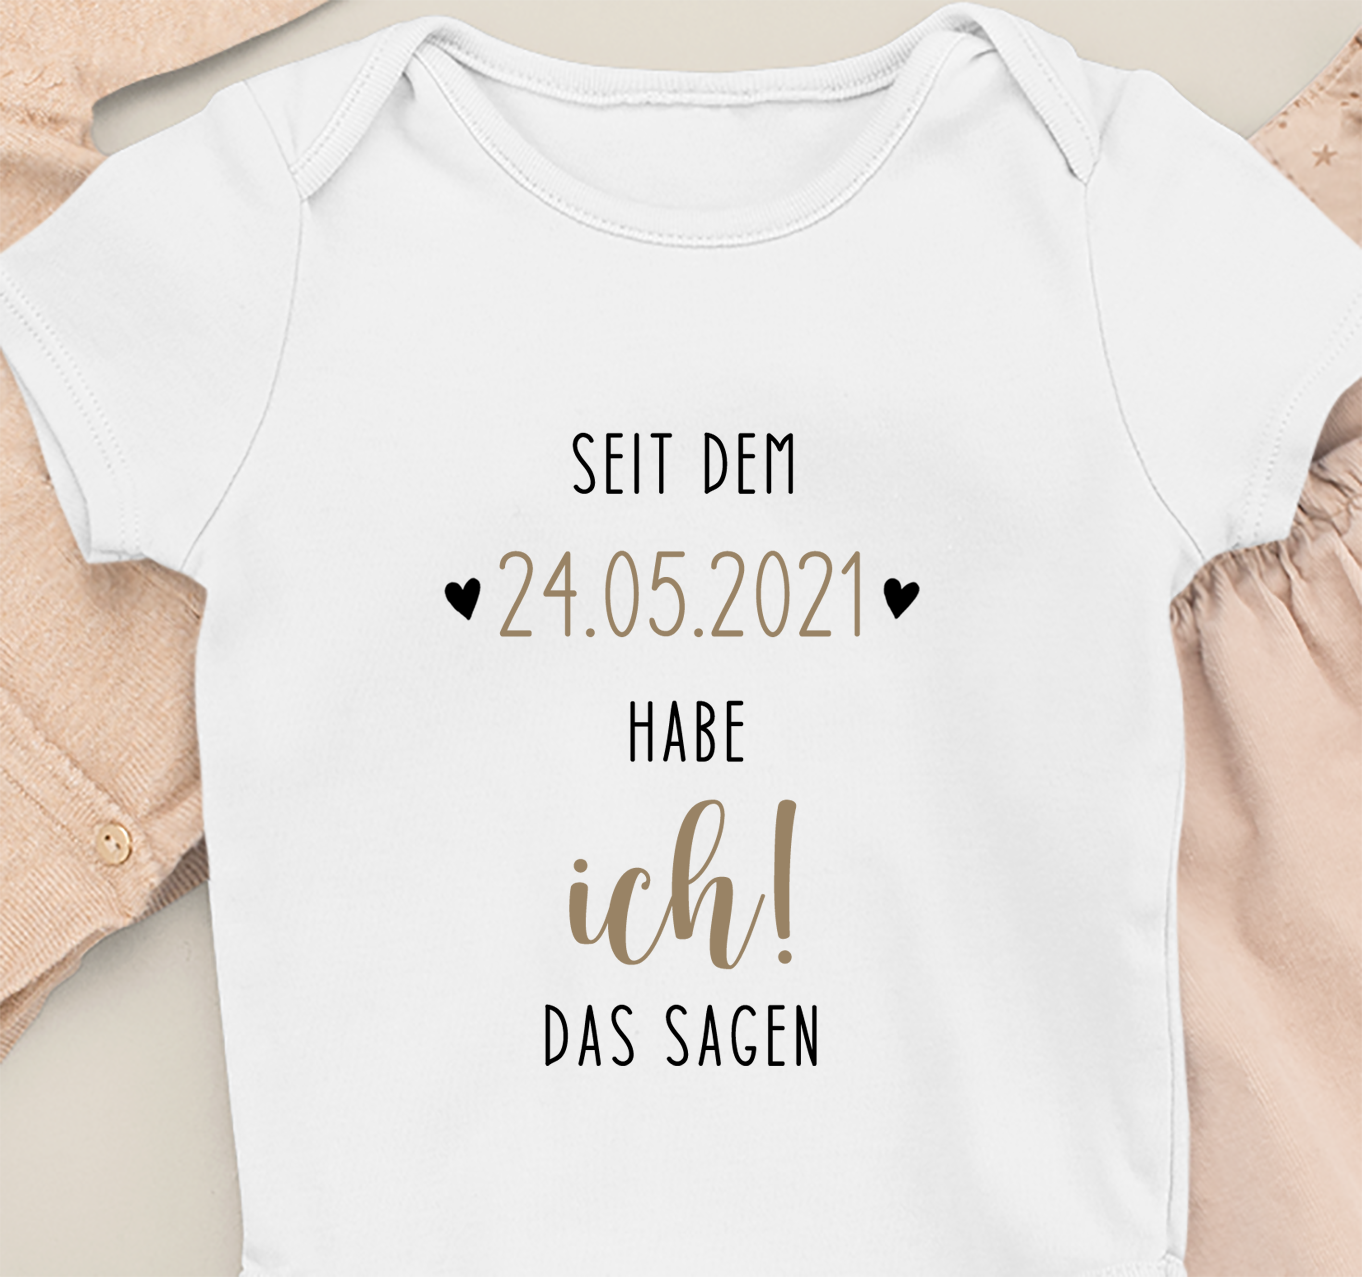 Since the "date of birth" I've been in charge! - Organic baby body white - Date personalized